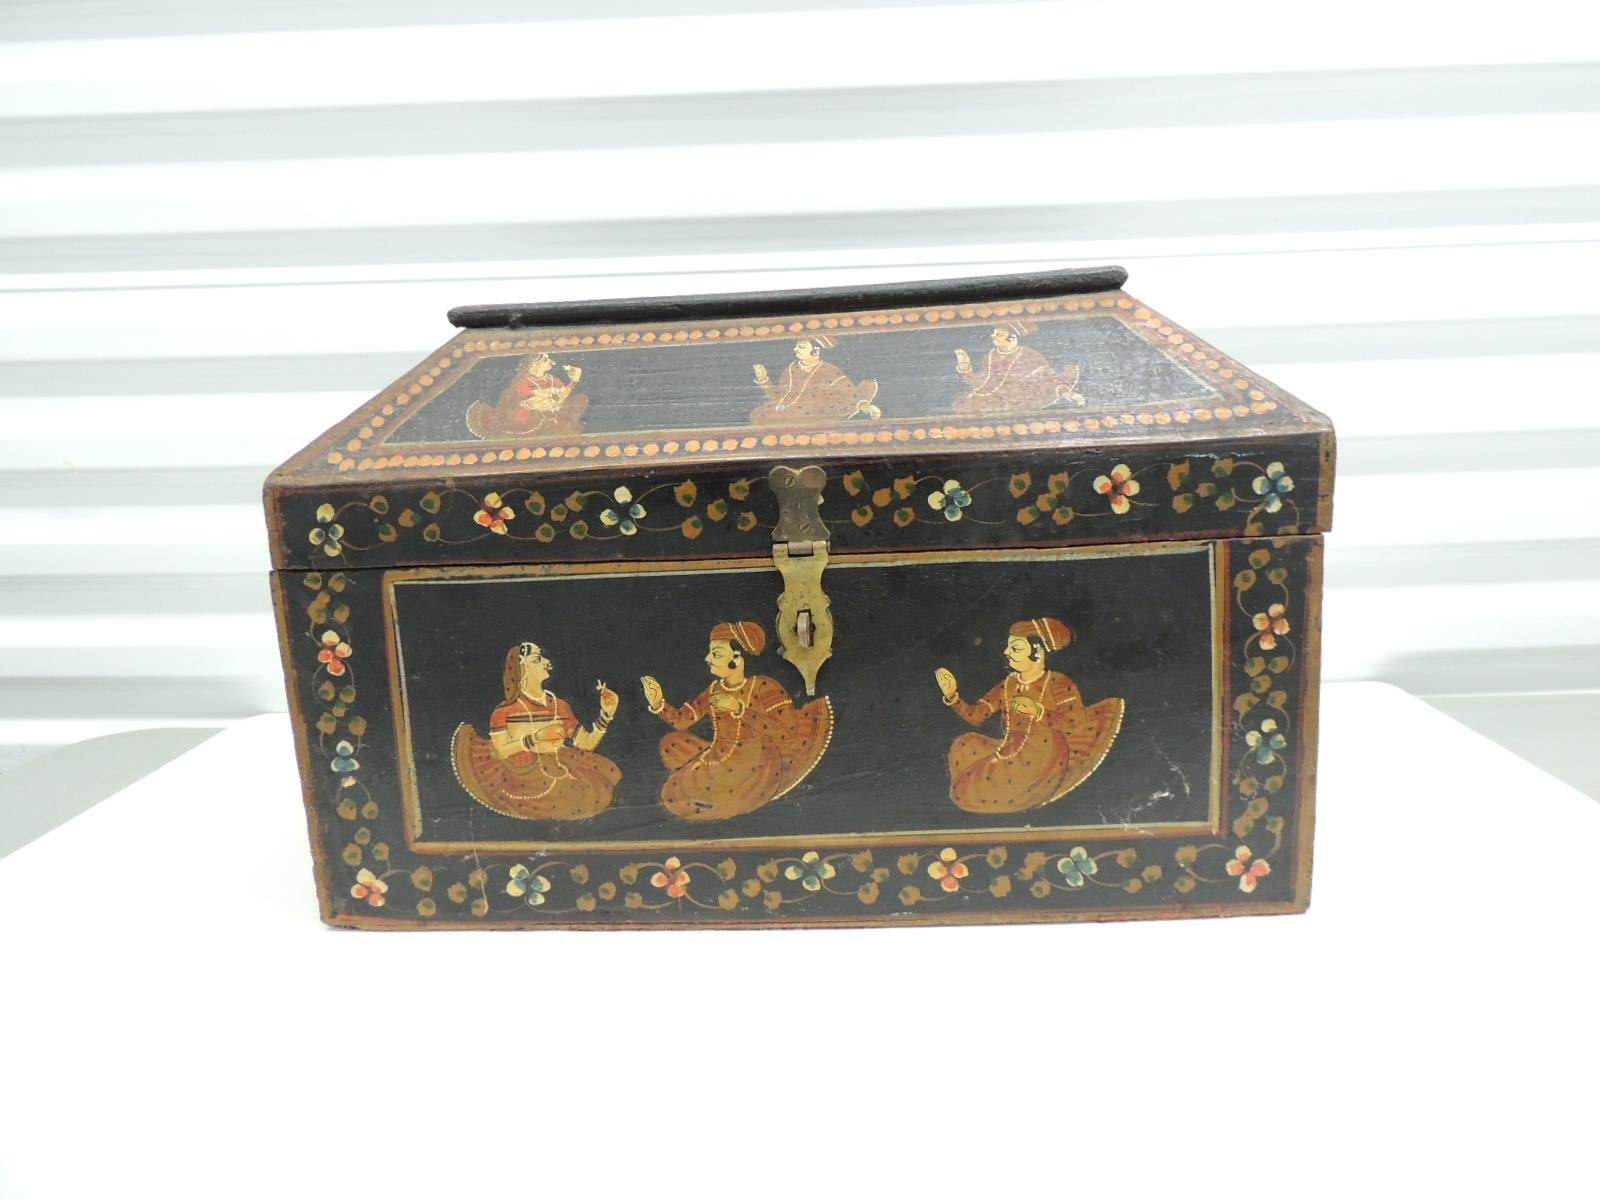 Vintage large Scale Hand-Painted Indian decorative box.
Large box with Indian characters in traditional garments.
Rajasthani
Size: 19